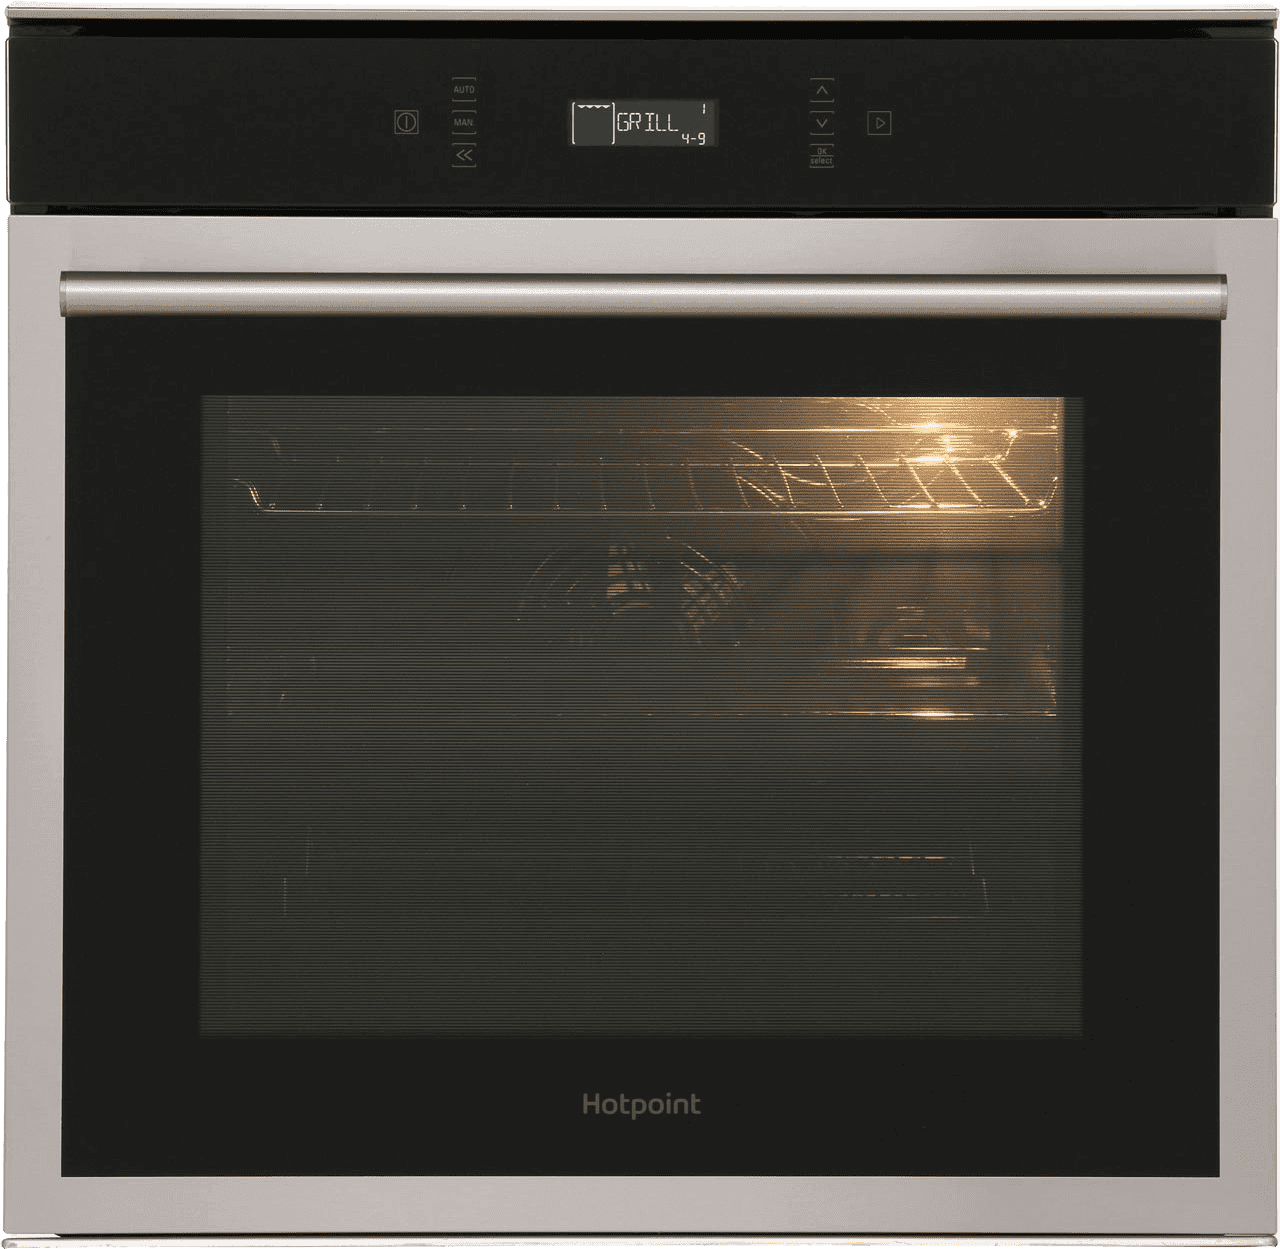 Hotpoint Class 6 SI6874SPIX Built In Electric Single Oven with Pyrolytic Cleaning - Stainless Steel - A+ Rated, Stainless Steel